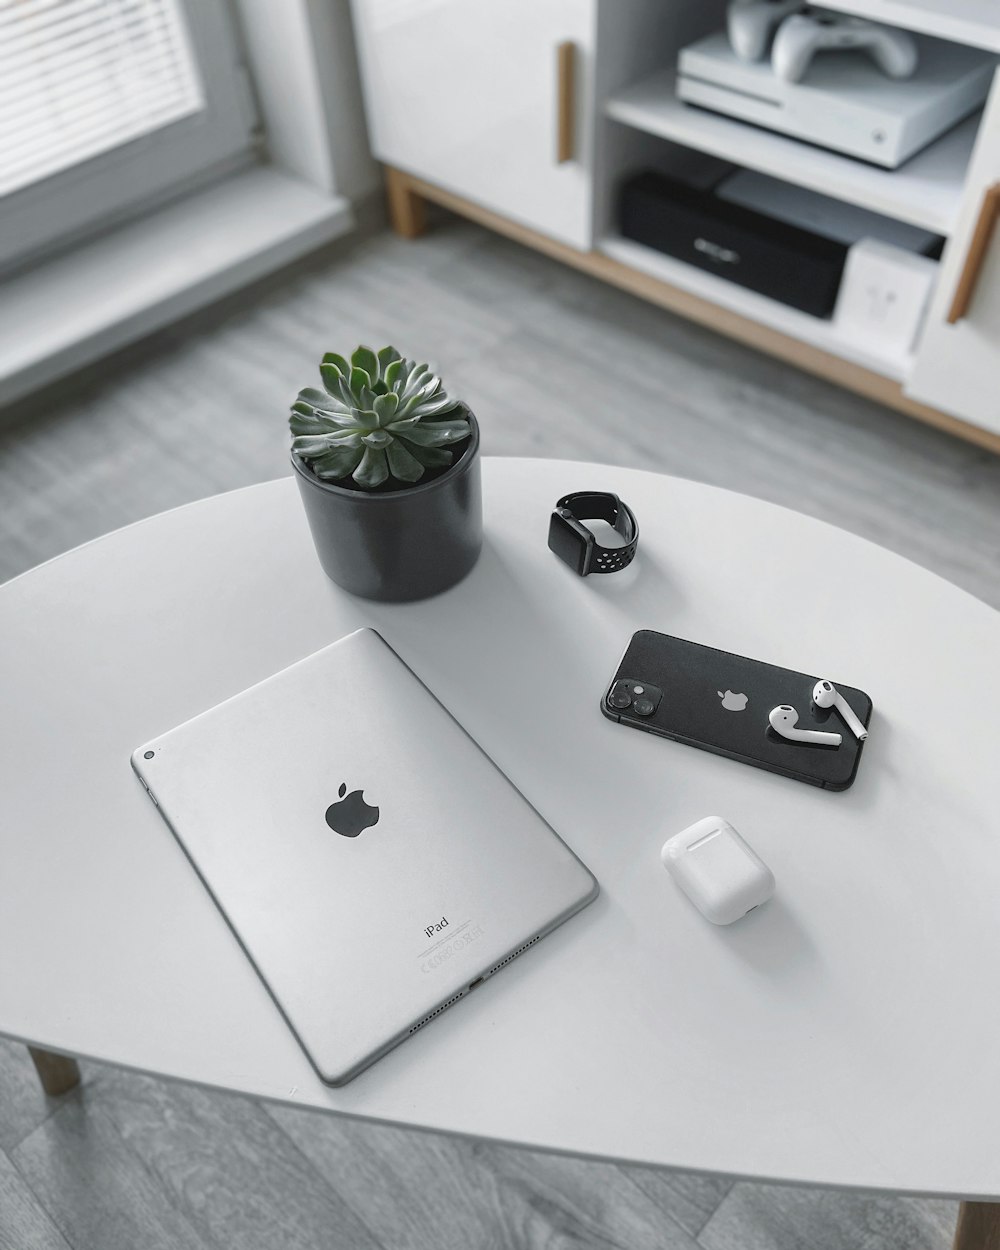 silver macbook beside white apple magic mouse and green plant on white table